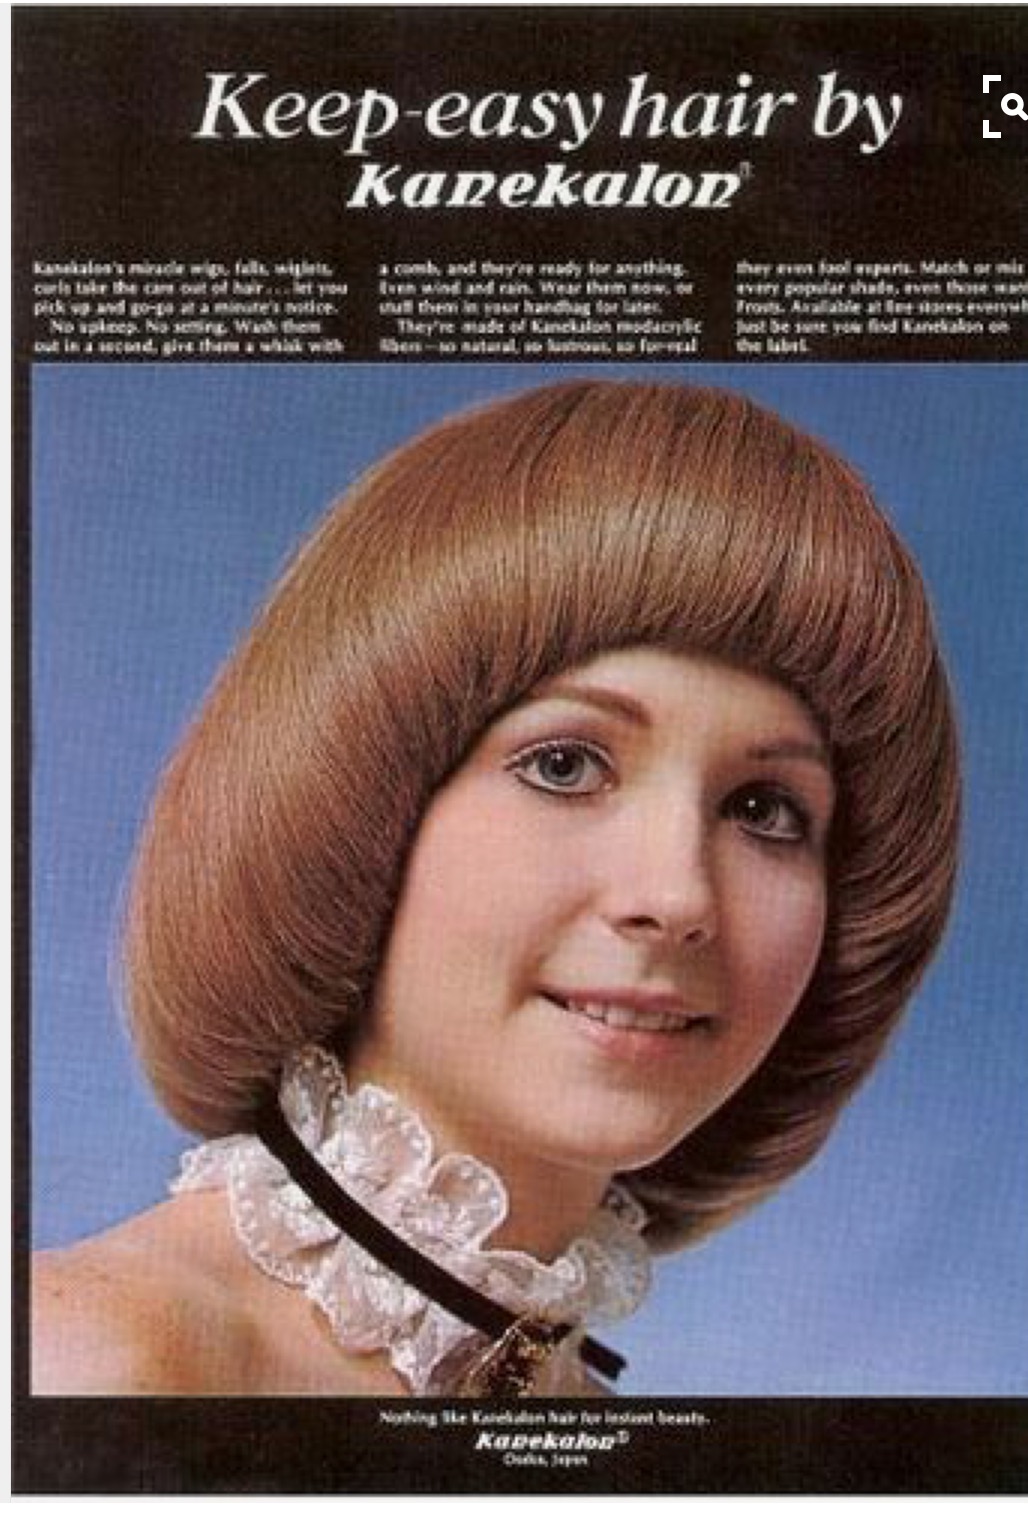 funny 70s hairstyles - Keepeasy hair by Kanekalon a center picha el plet Wc there for Match Rame Iron papelar shat the ul the chance to let Trots. Alle They' re including set dana Kapekoop